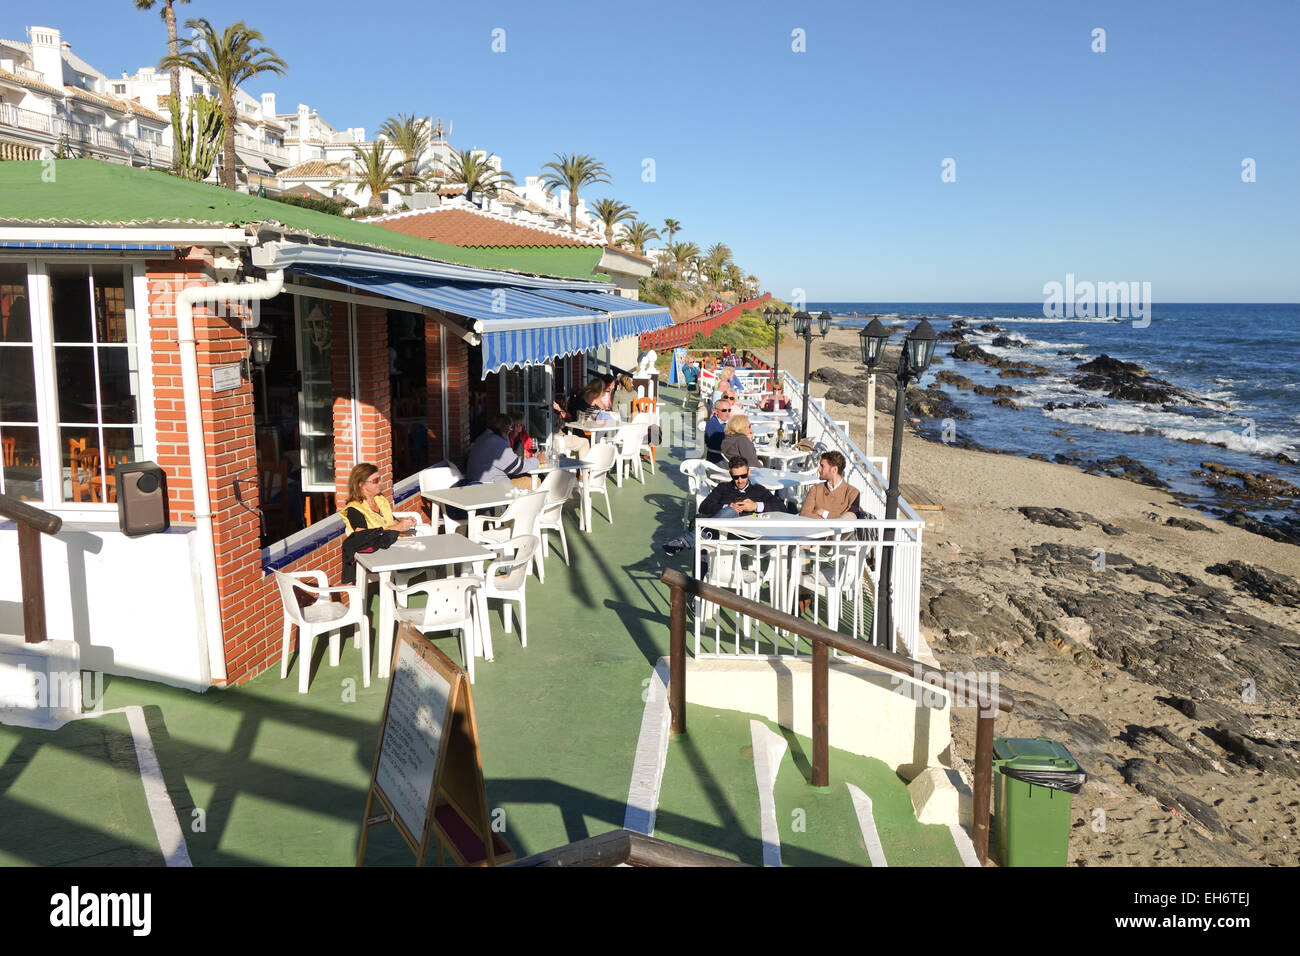 Tourists in winter season at beach bar, cafe, restaurant at coast Southern Spain, La Cala, Andalusia. Spain. Stock Photo